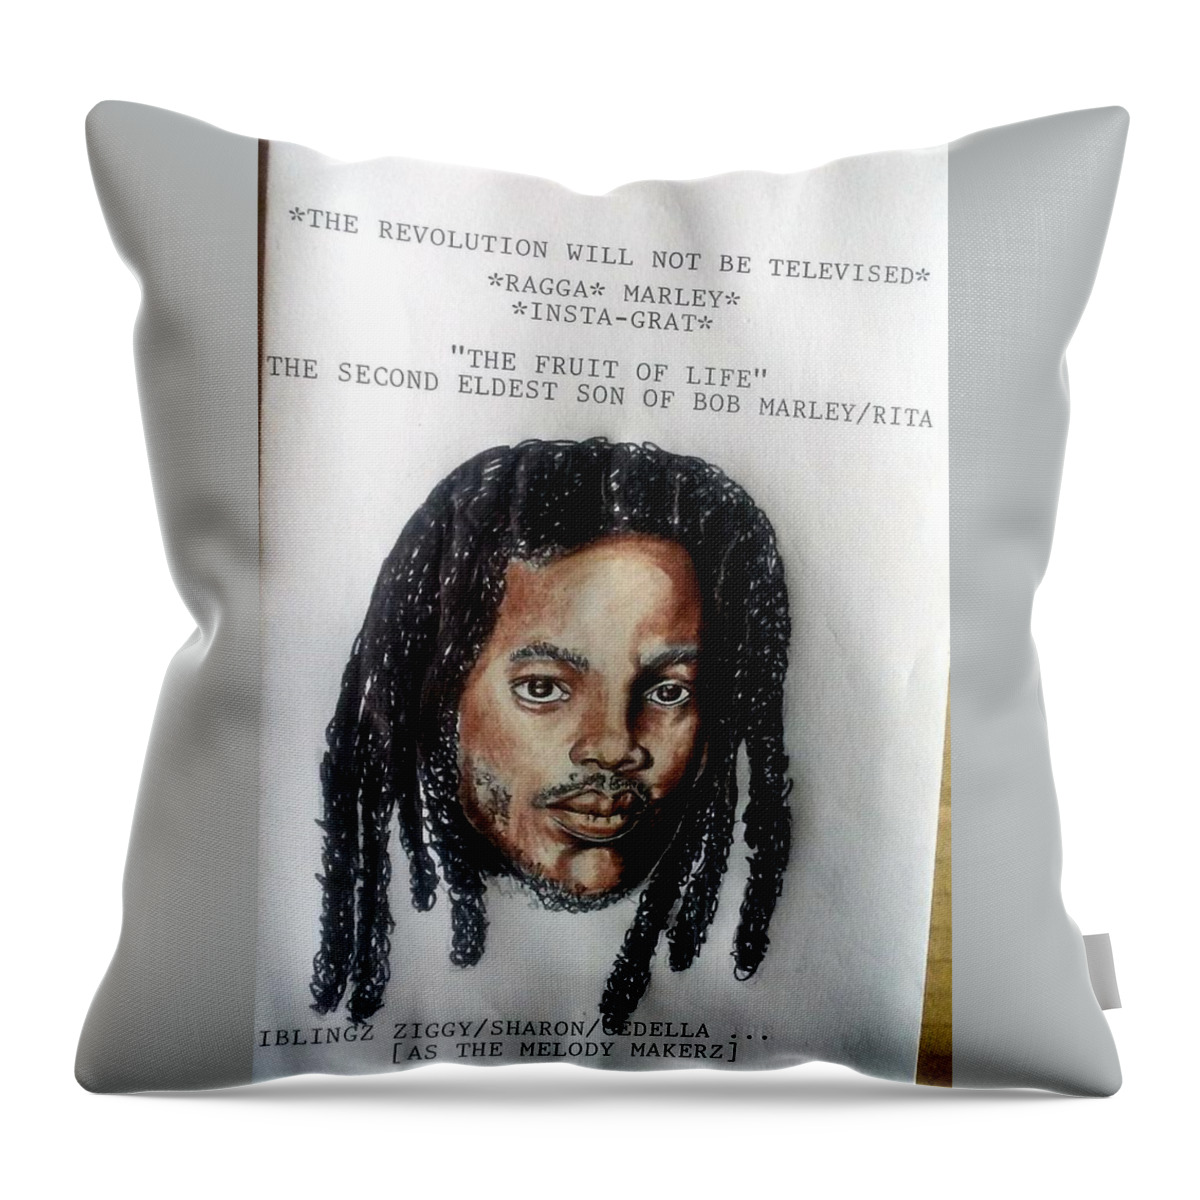 Black Art Throw Pillow featuring the drawing The Revolution Will Not Be Televised by Joedee